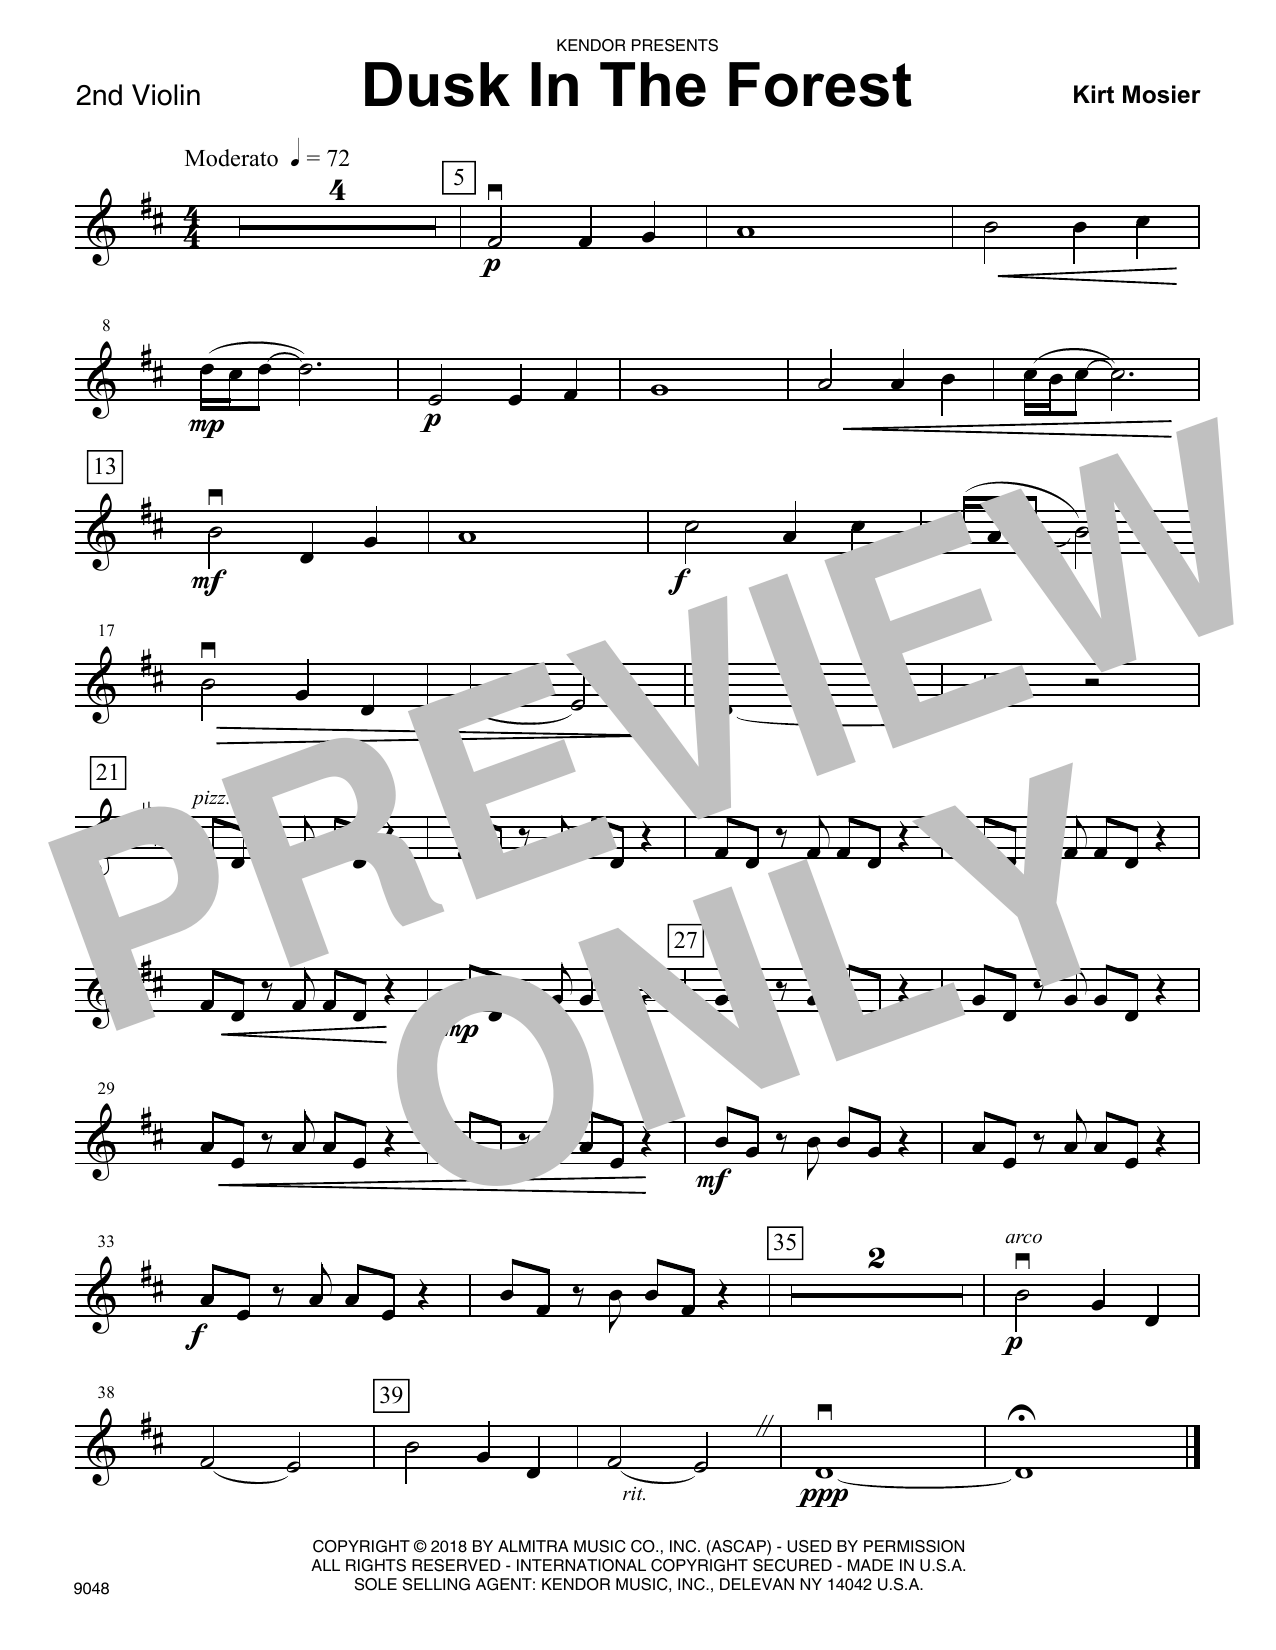 Download Kirt Mosier Dusk In The Forest - 2nd Violin Sheet Music